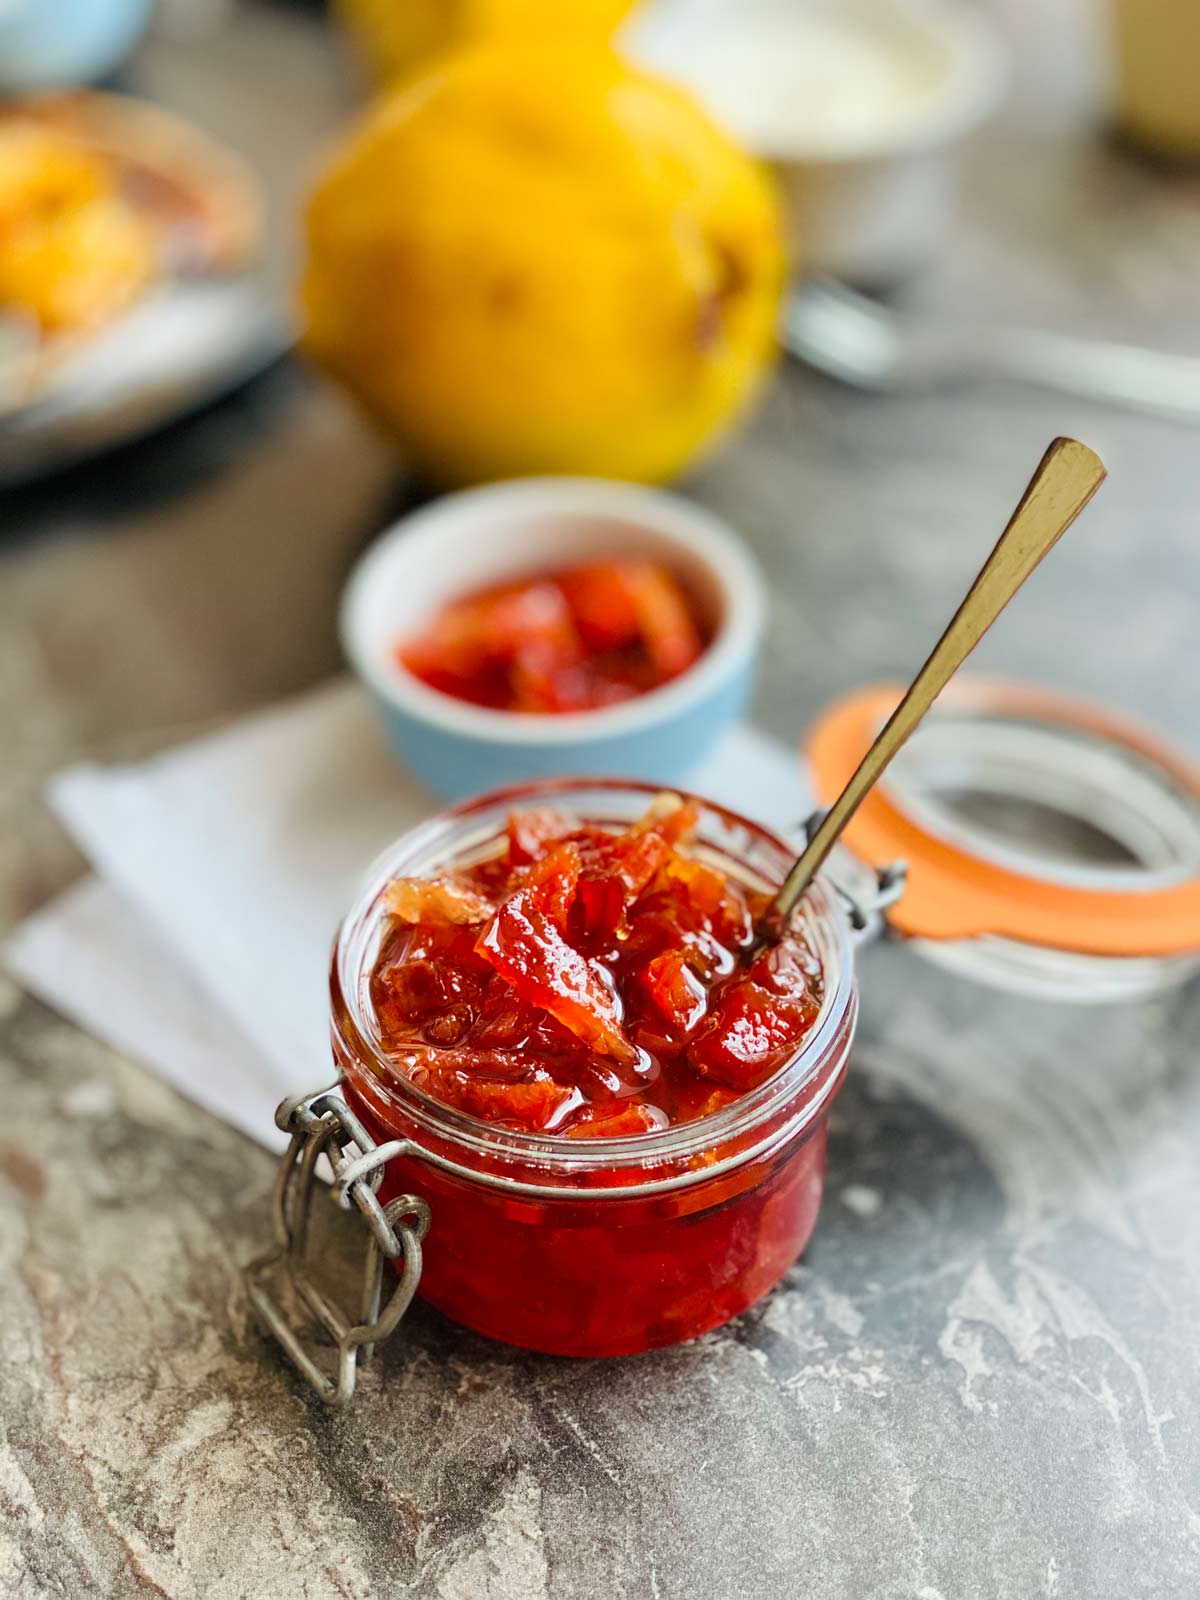 Quince jam in a preserve jar with the lid opened on the right and a teaspoon tucked all in